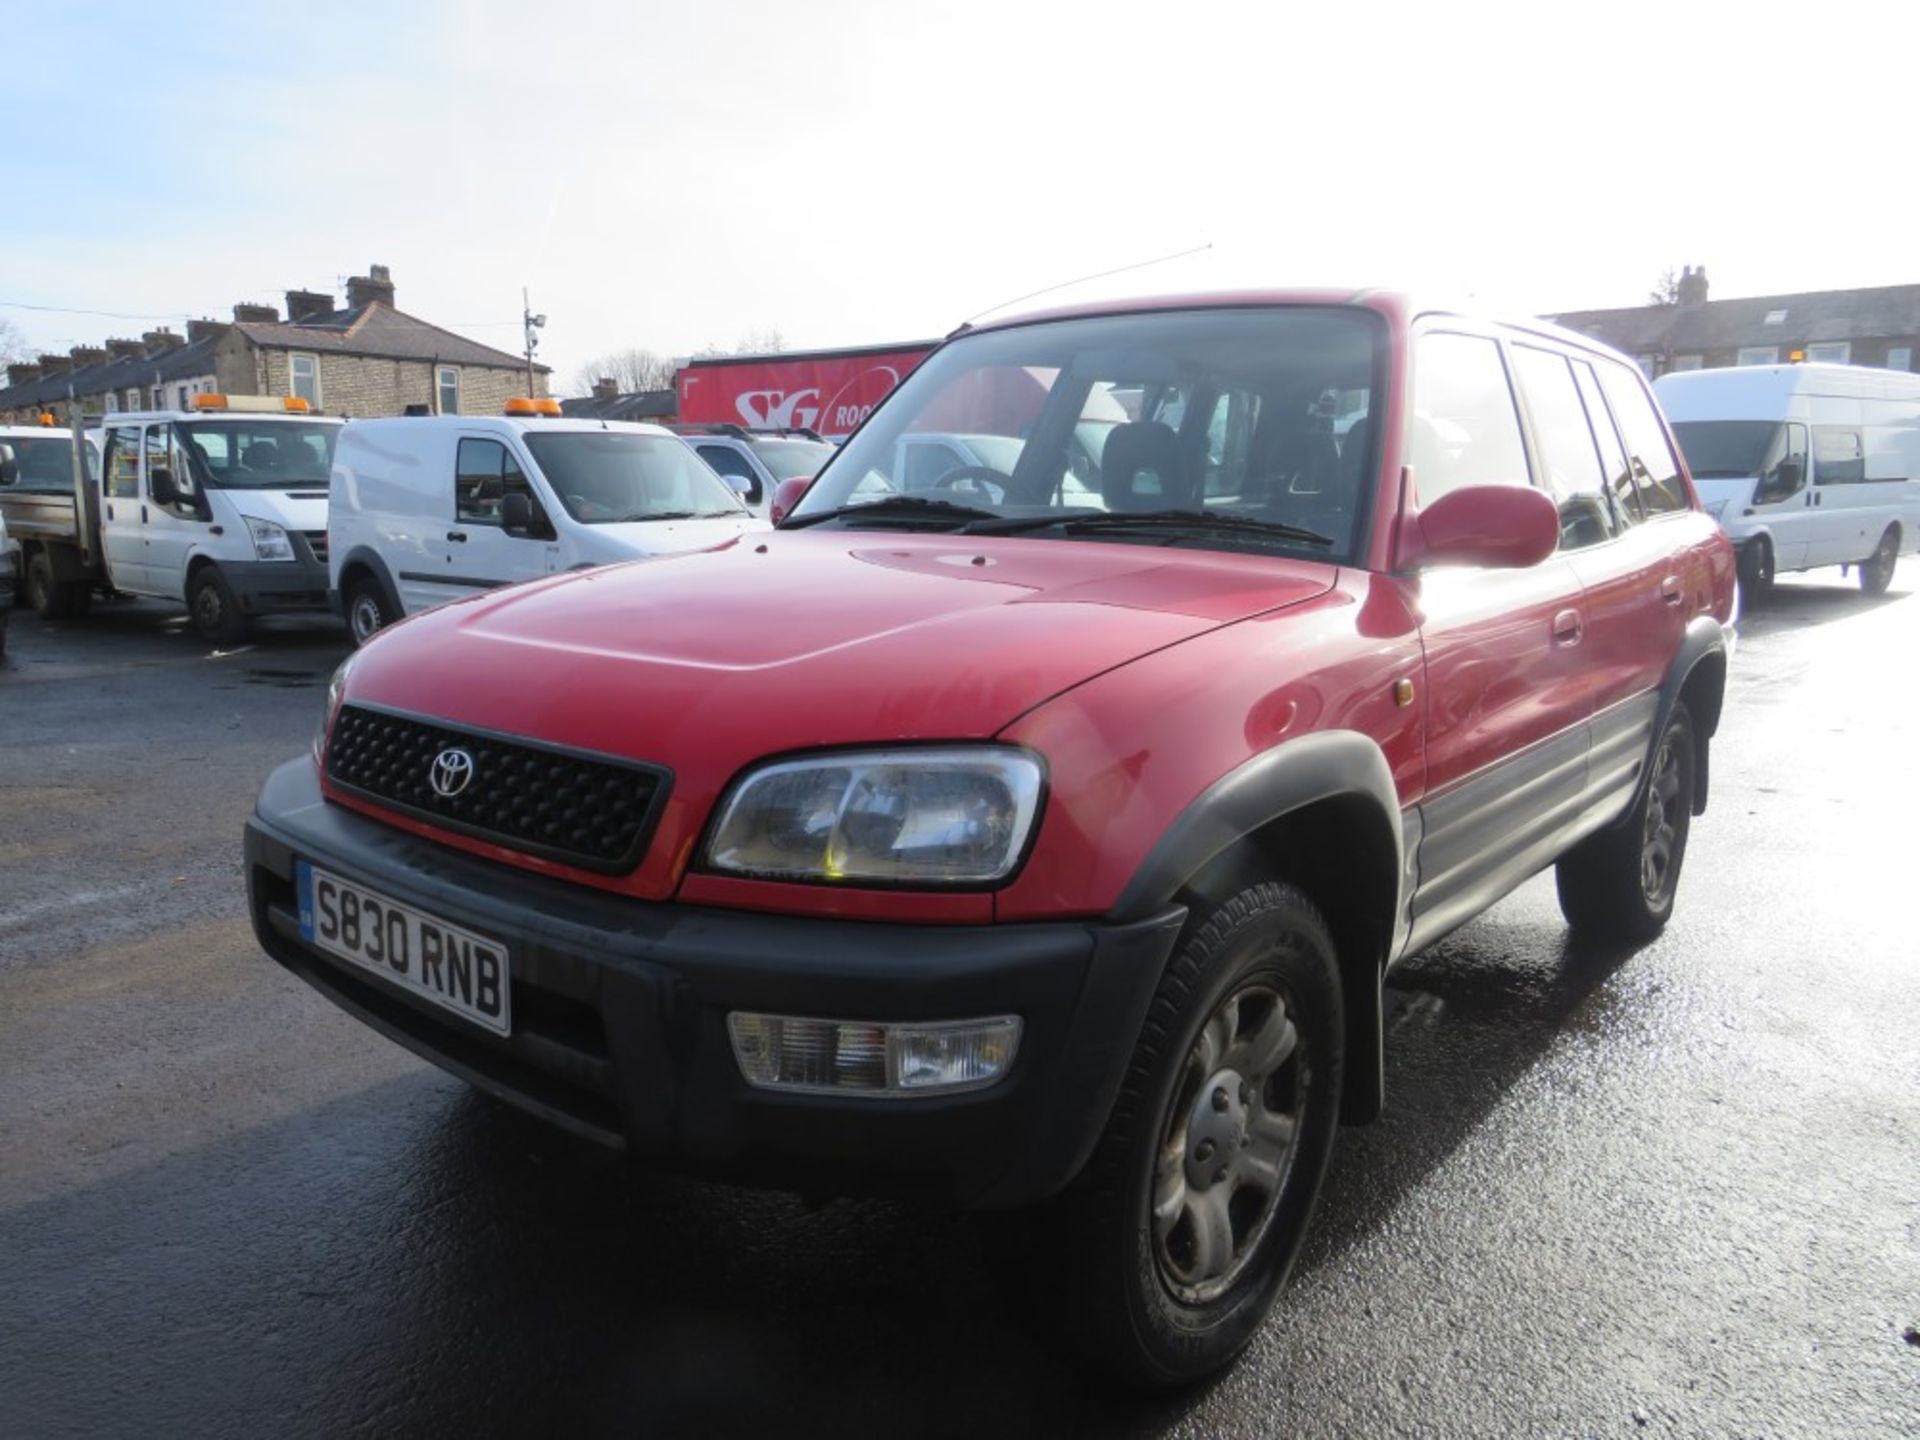 S reg TOYOTA RAV 4, 1ST REG 08/98, TEST 03/21, 85799M, V5 HERE, PREVIOUS KEEPERS UKNOWN [NO VAT] - Image 2 of 6